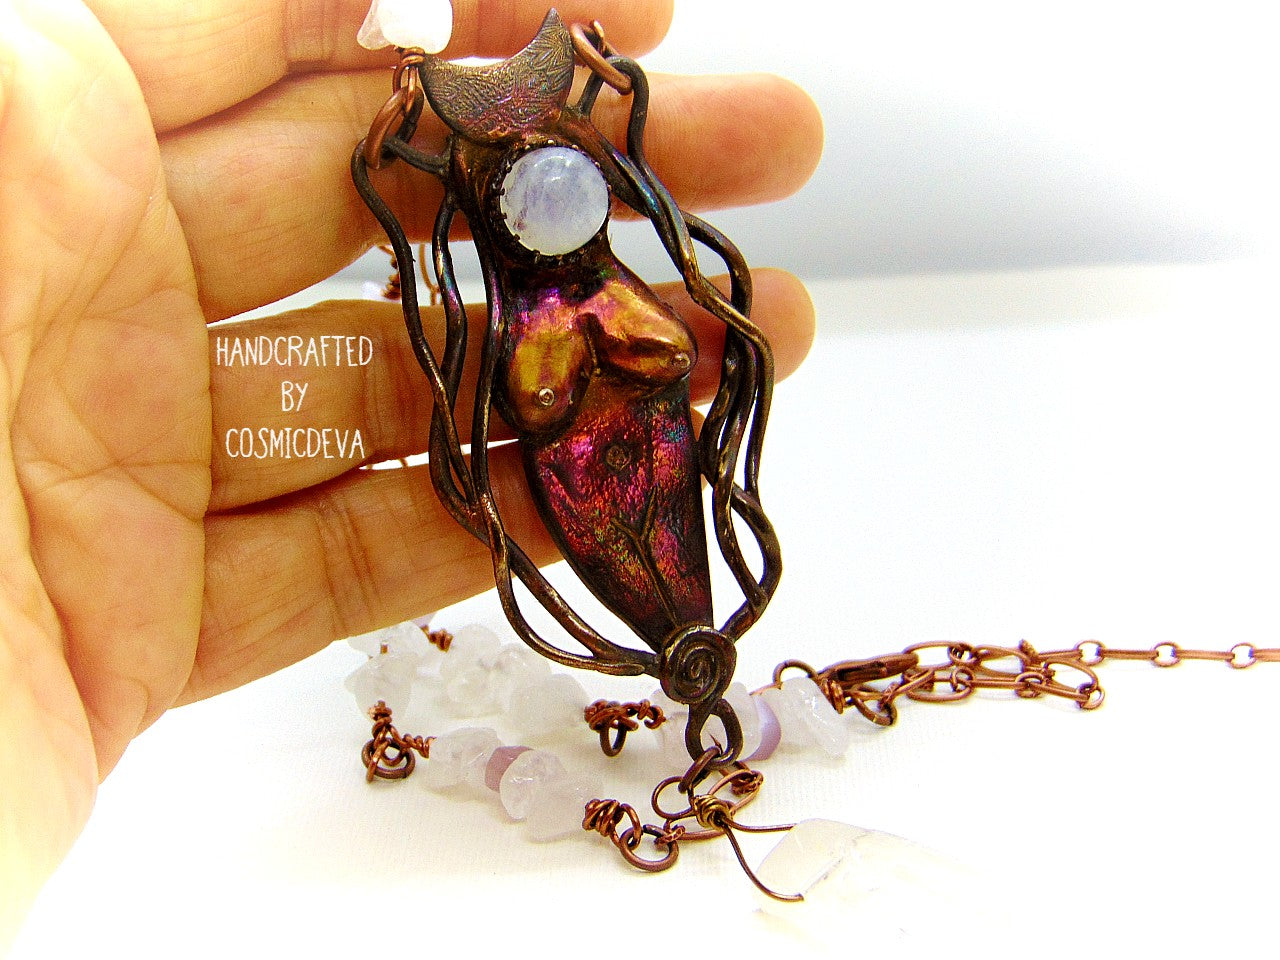 Lovely one-of-a-kind hand sculptured solid bronze organic primitive female divine energy goddess pendant featuring a moonstone and a dangling clear quartz crystal point. The pendant was oxidized to create this beautiful shimmering color tones. The handcrafted copper chain necklace features clear white quartz crystals and rose quartz.